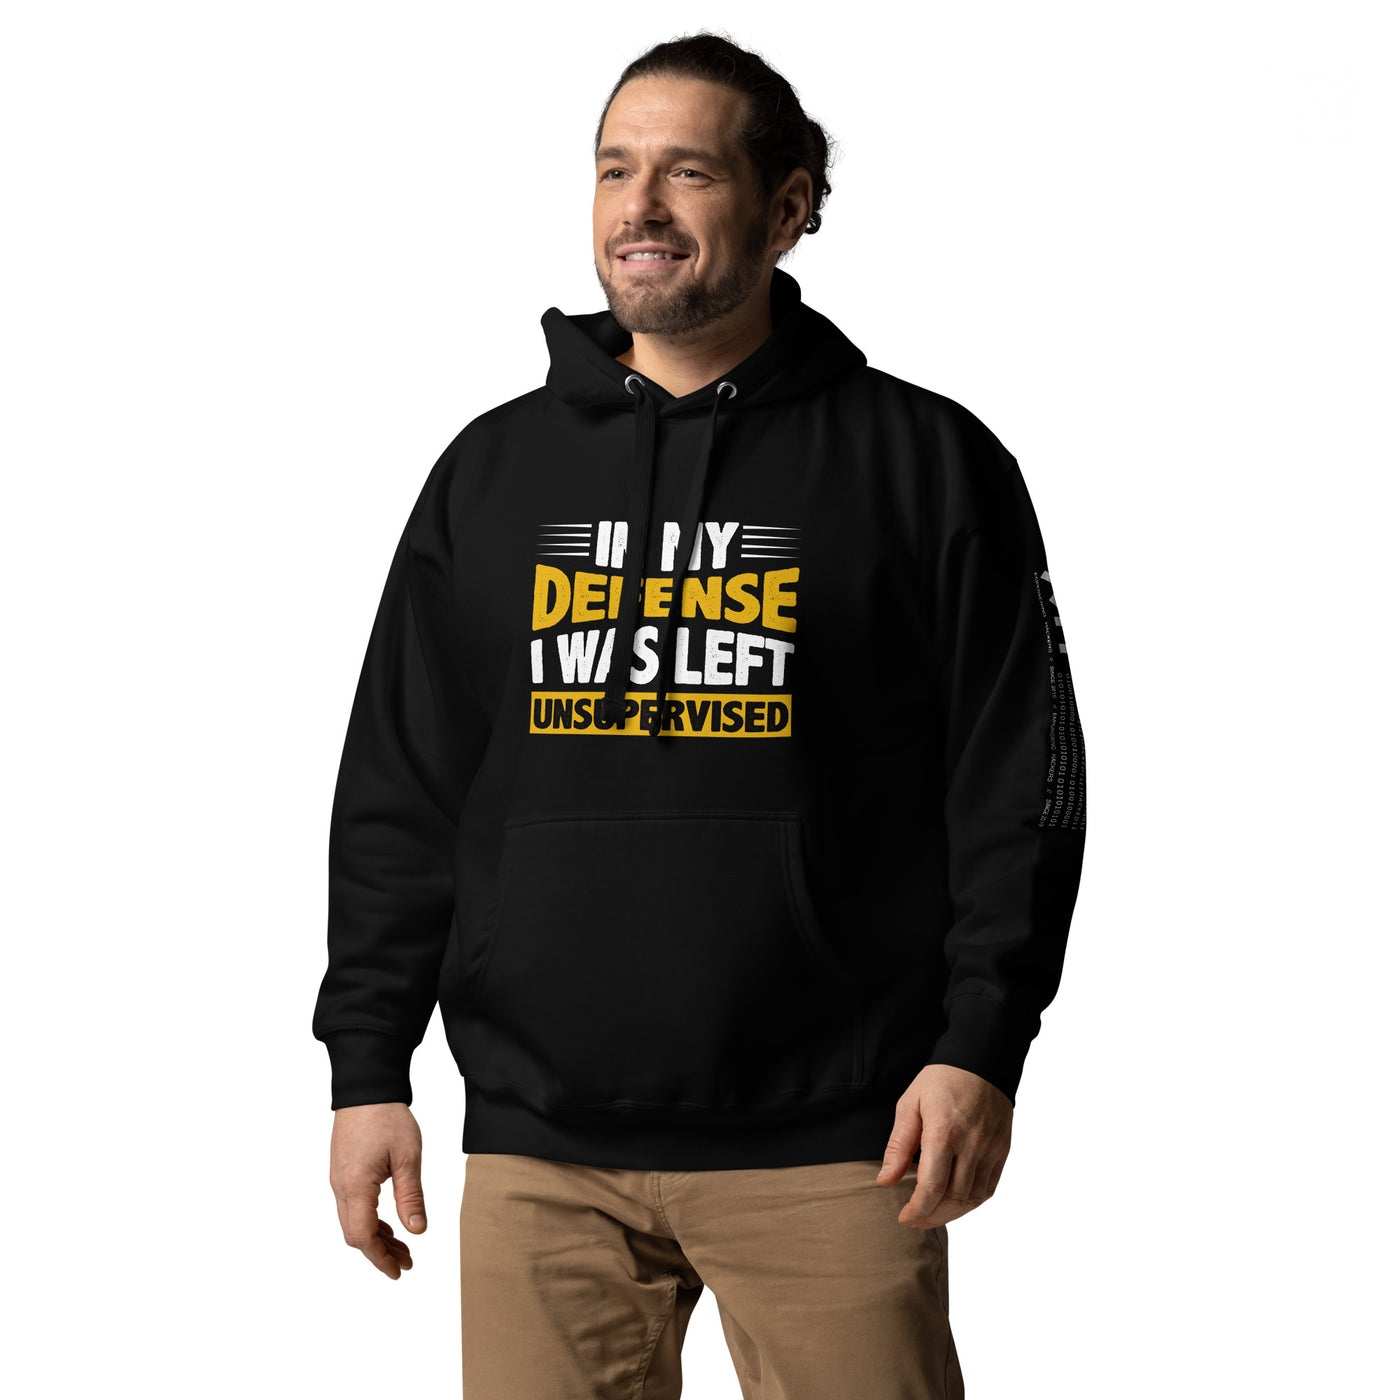 In my Defense, I was left Unsupervised - Unisex Hoodie